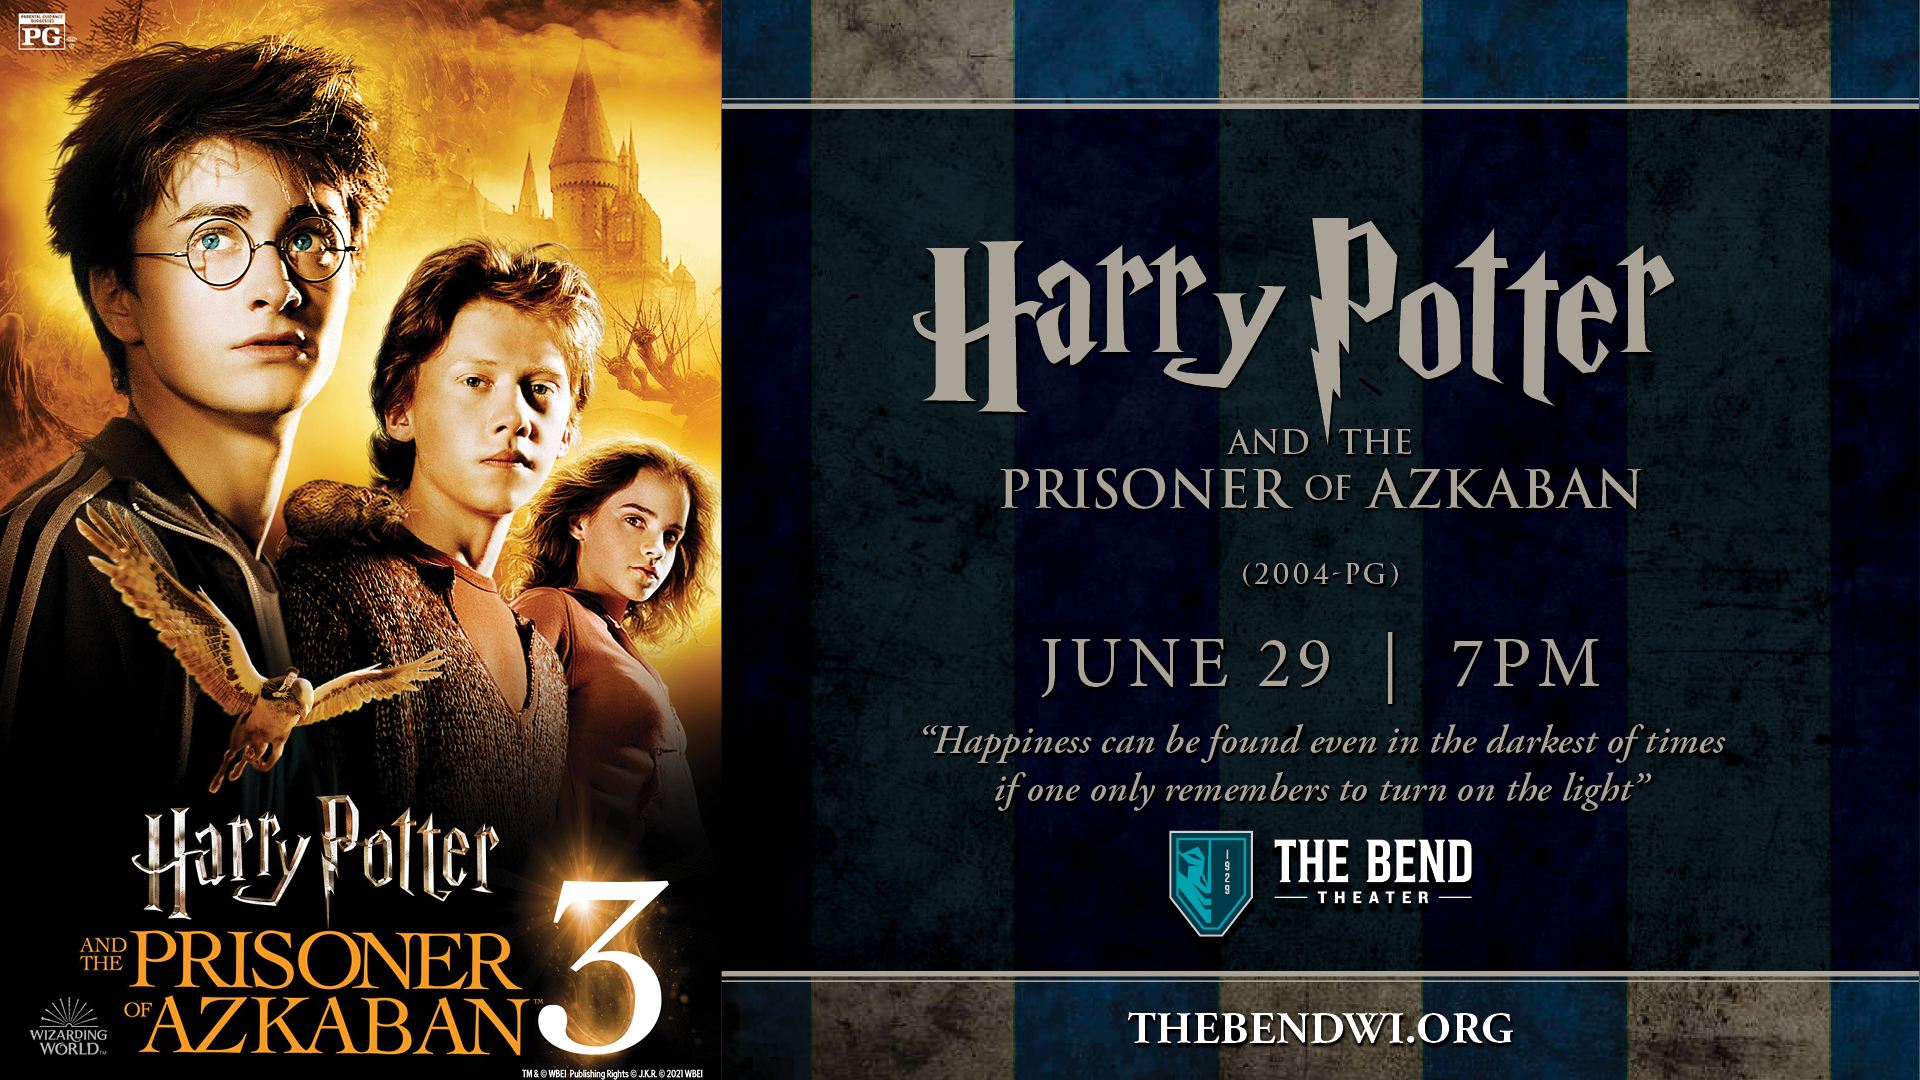 Wizarding World Nights at The Bend Theater: Harry Potter and The Prisoner of Azkaban (2004 - PG)